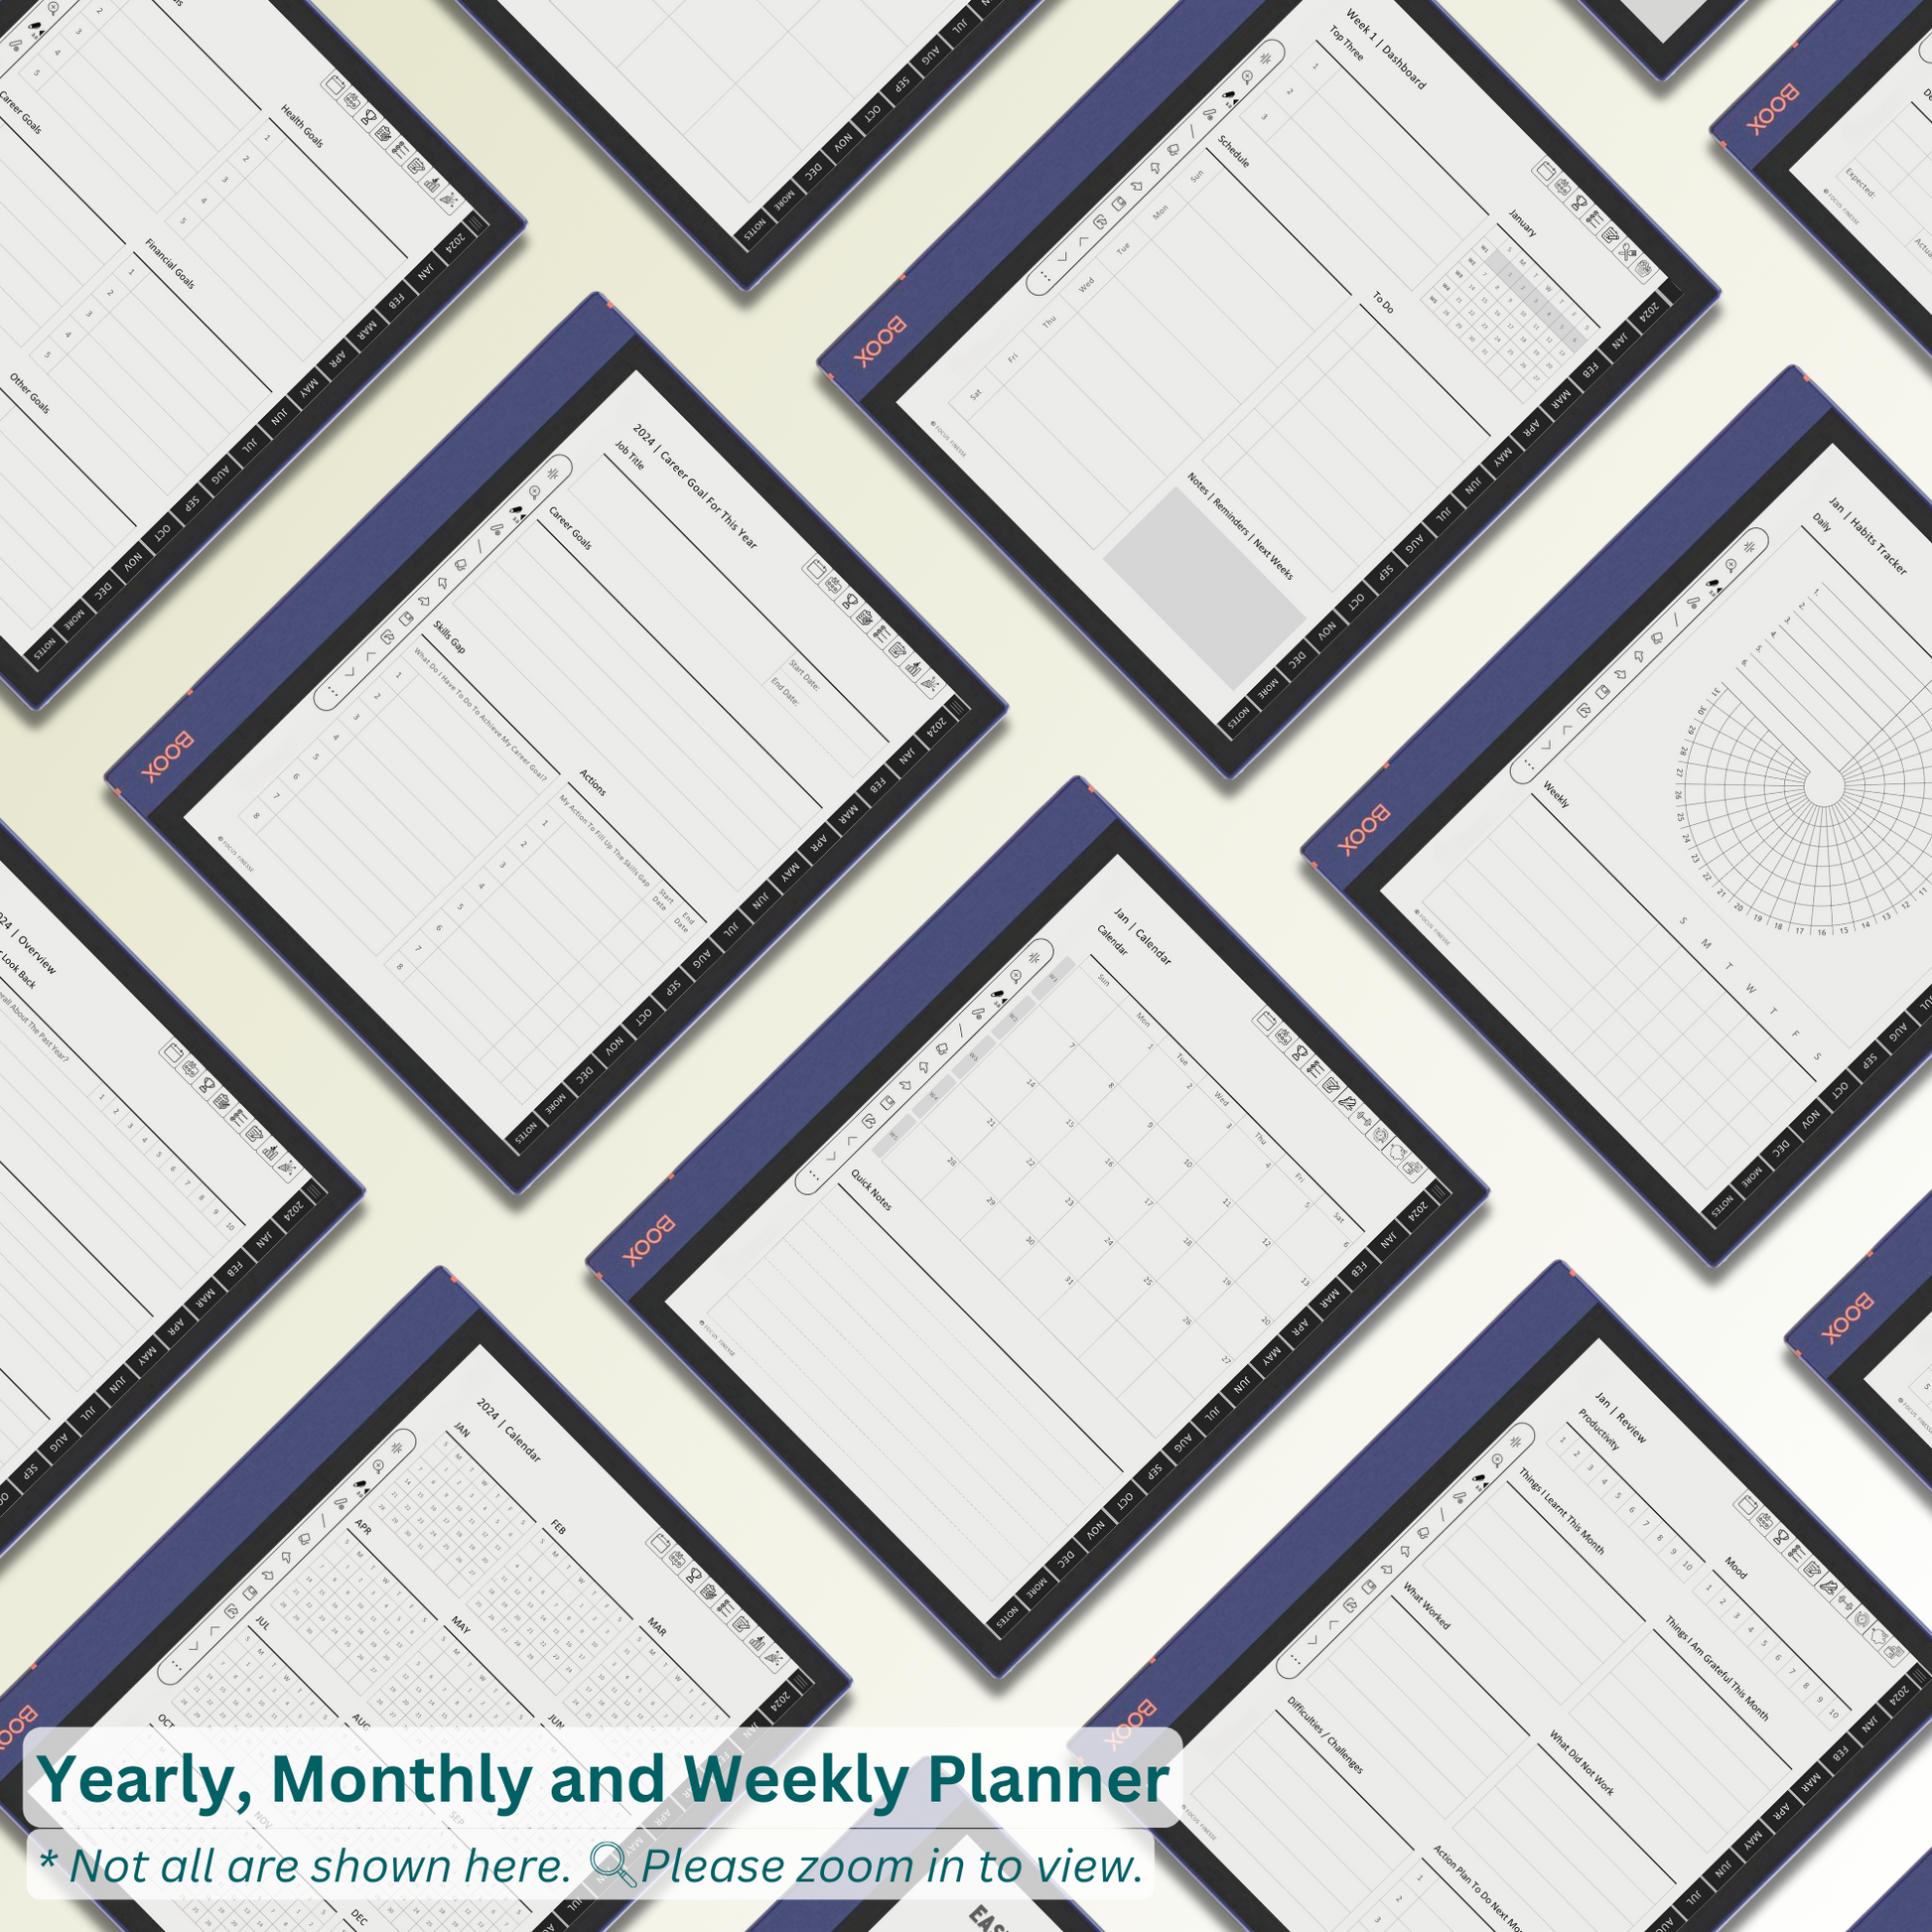 Onyx Boox Weekly Planner Templates.